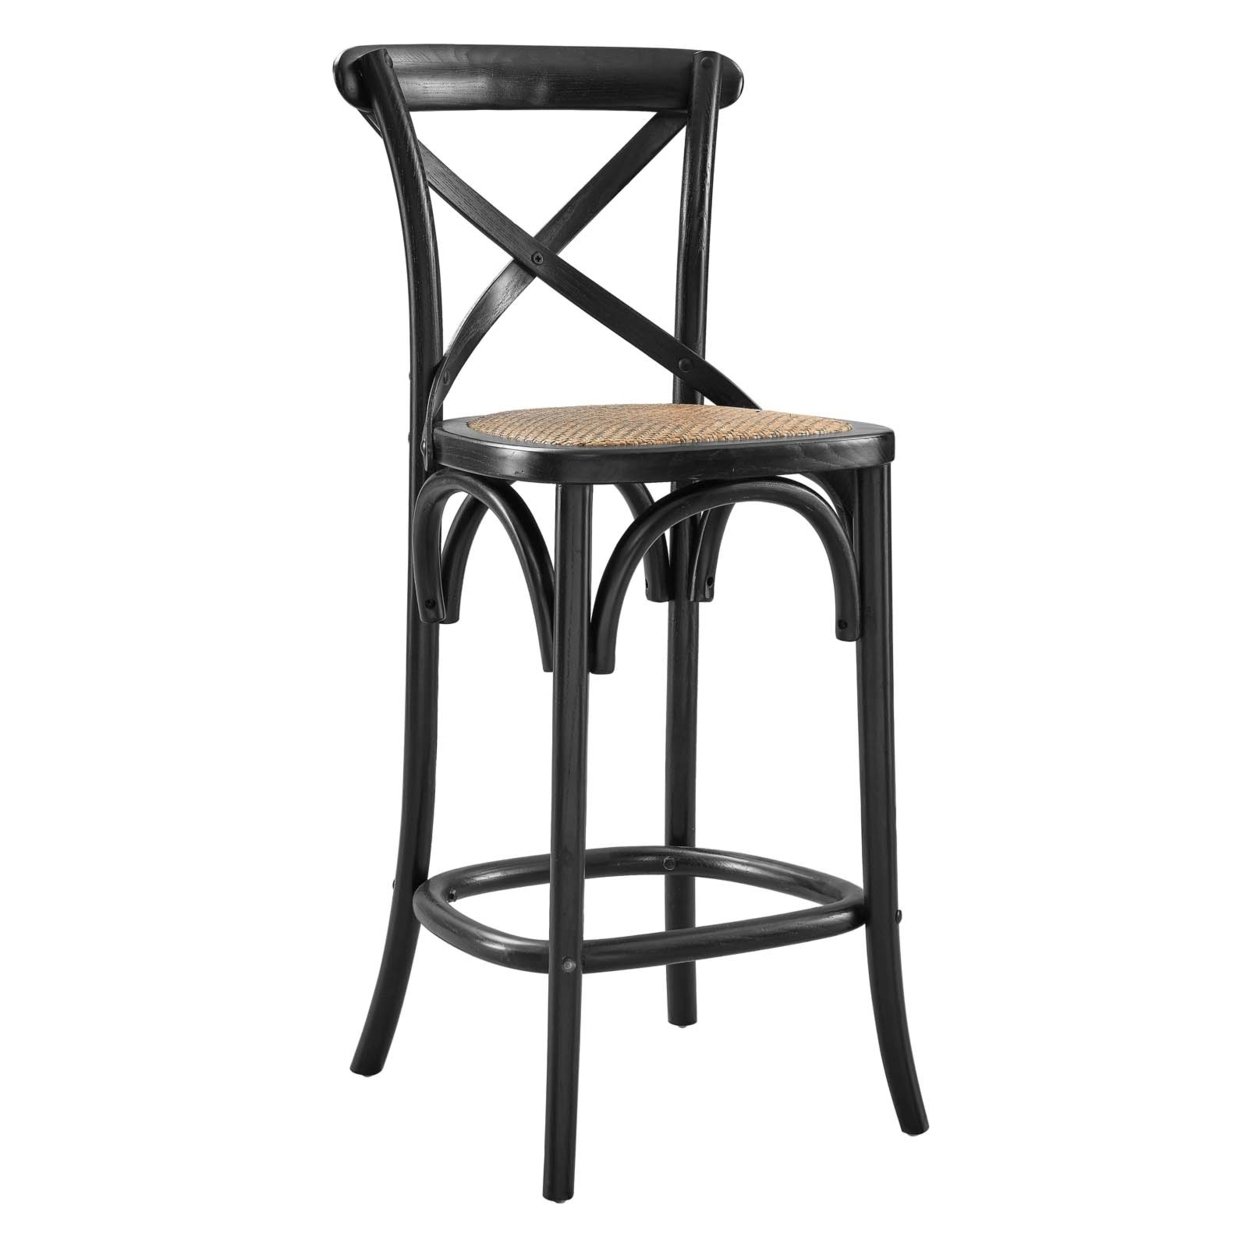 Wooden Farmhouse Counter Stool With X Brace Back And Woven Seat, Black, Saltoro Sherpi